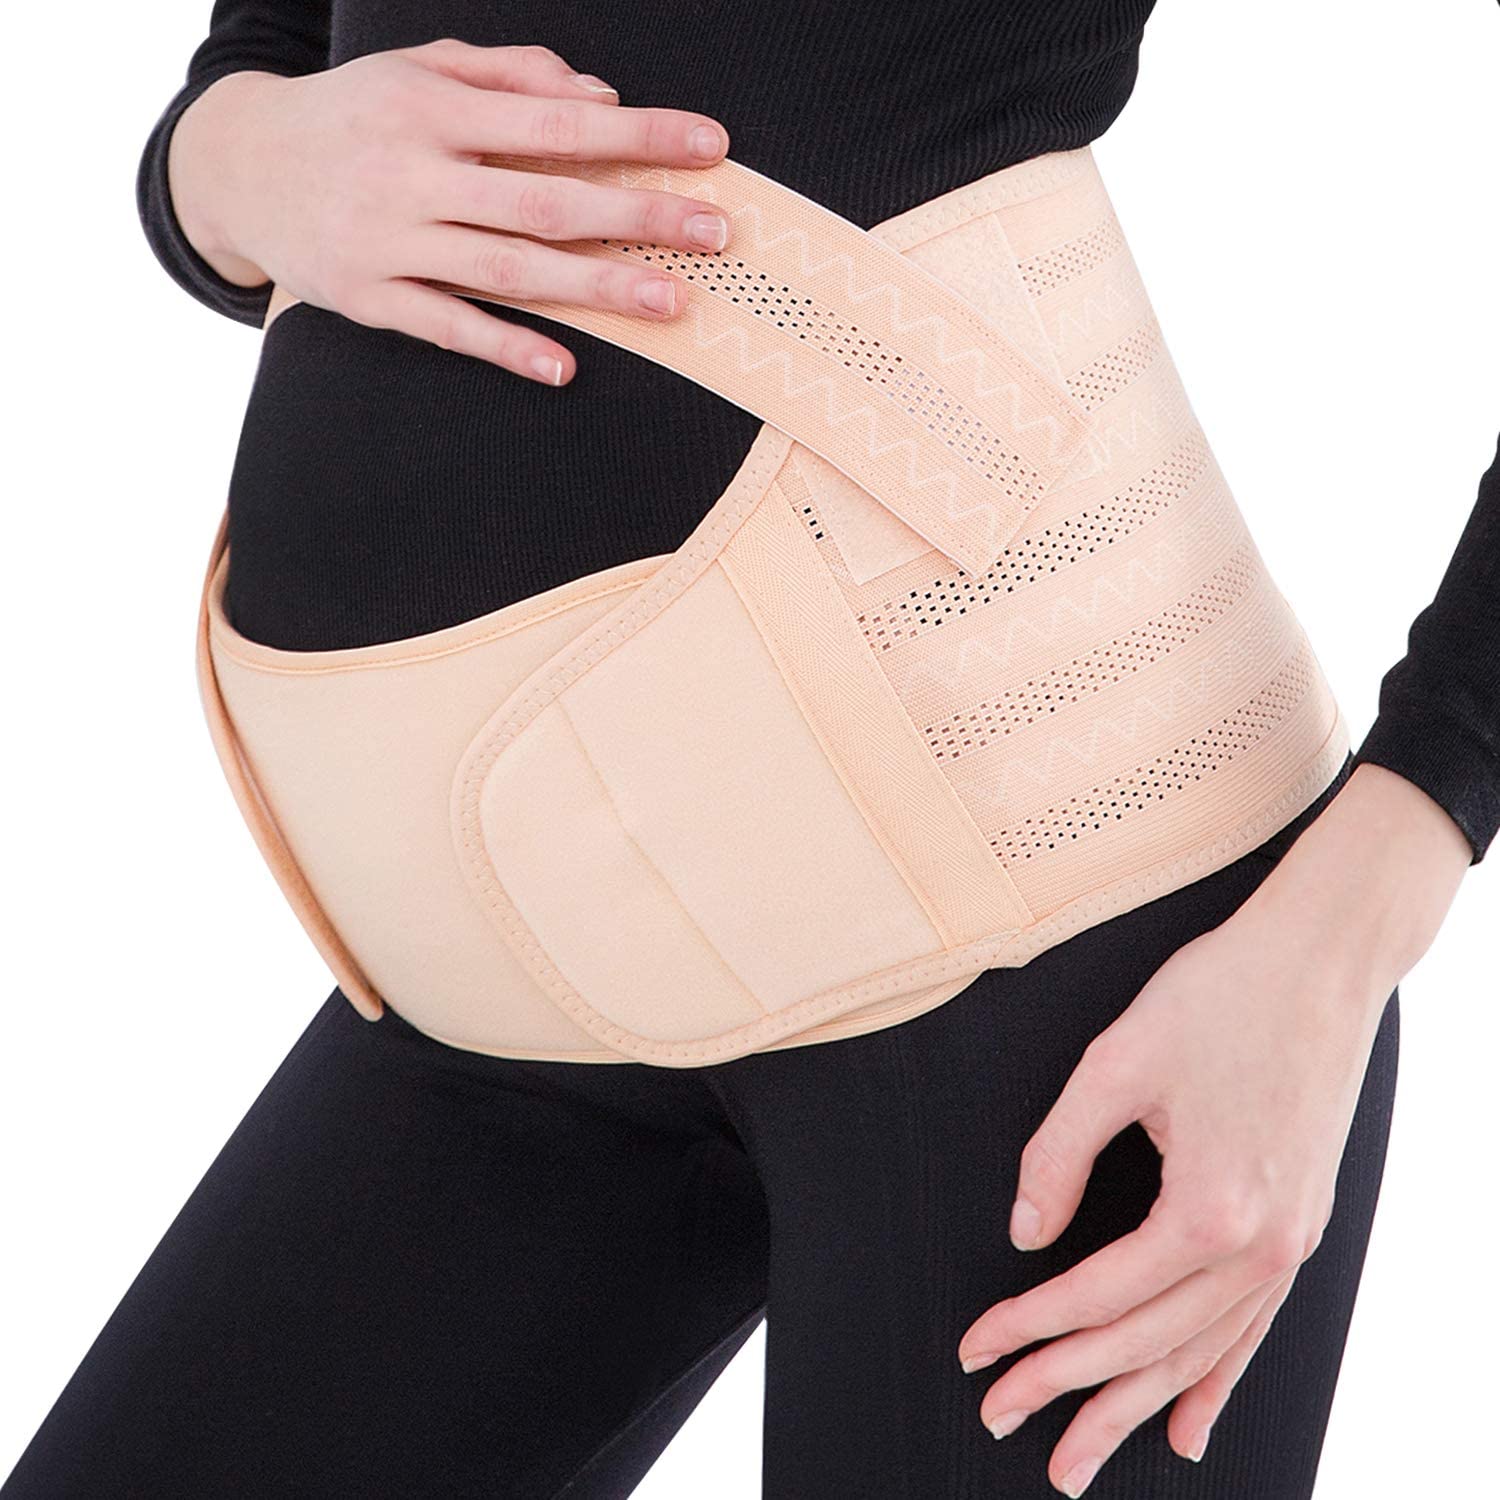 How does a pregnacy support belt work